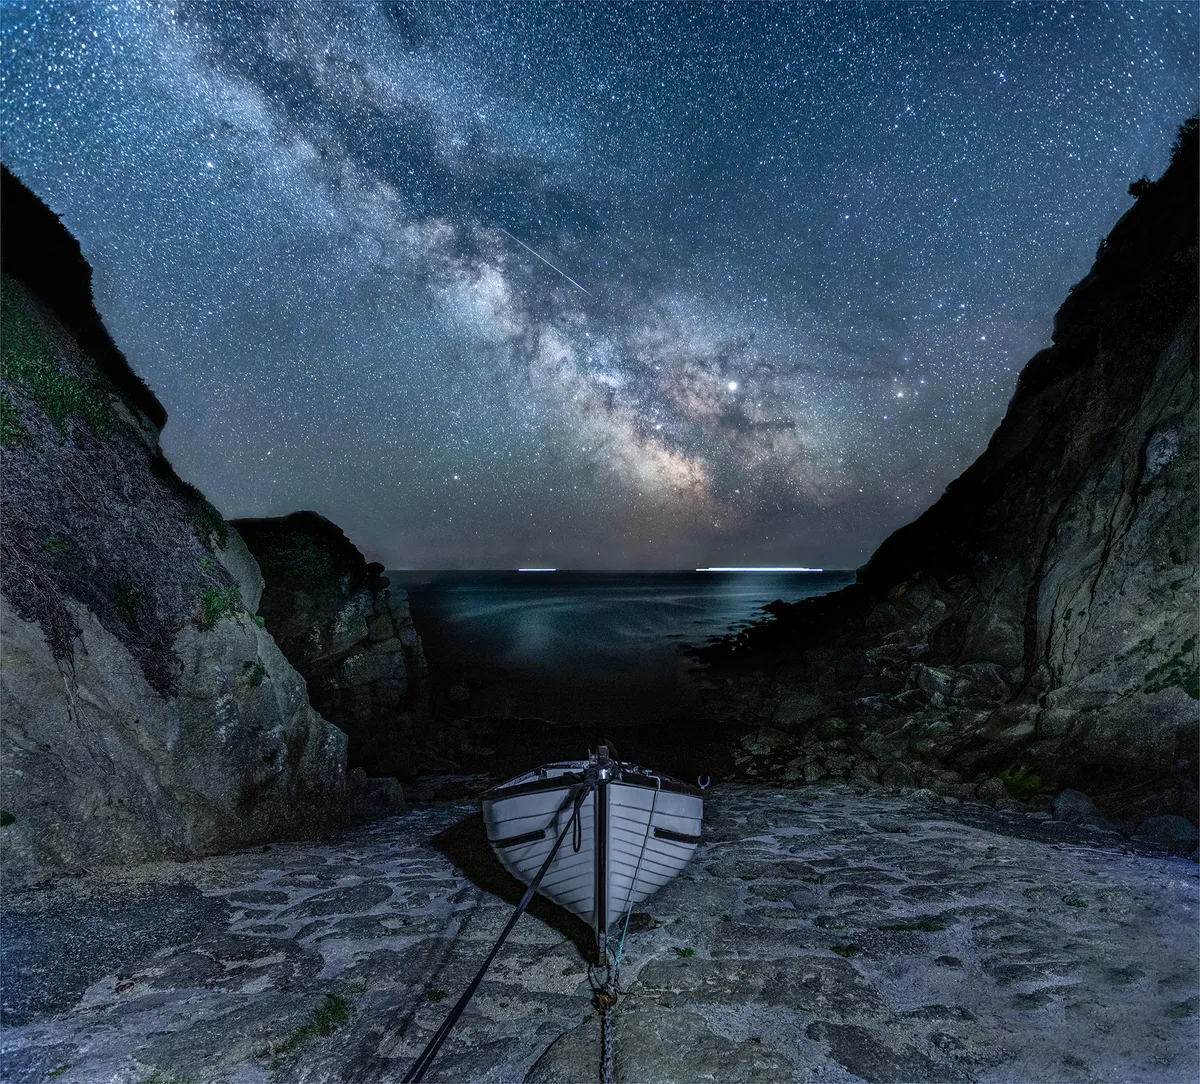 Milky Way and Meteor at Porthgwarra Jennifer Rogers (UK). Category: People & Space. Equipment: Canon 5D Mk IV camera, ISO 1250 Sky: 17mm f/4 lens, boat and foreround: 17mm f/8 lens, cliffs and meteor: 17 mm f/4 lens.